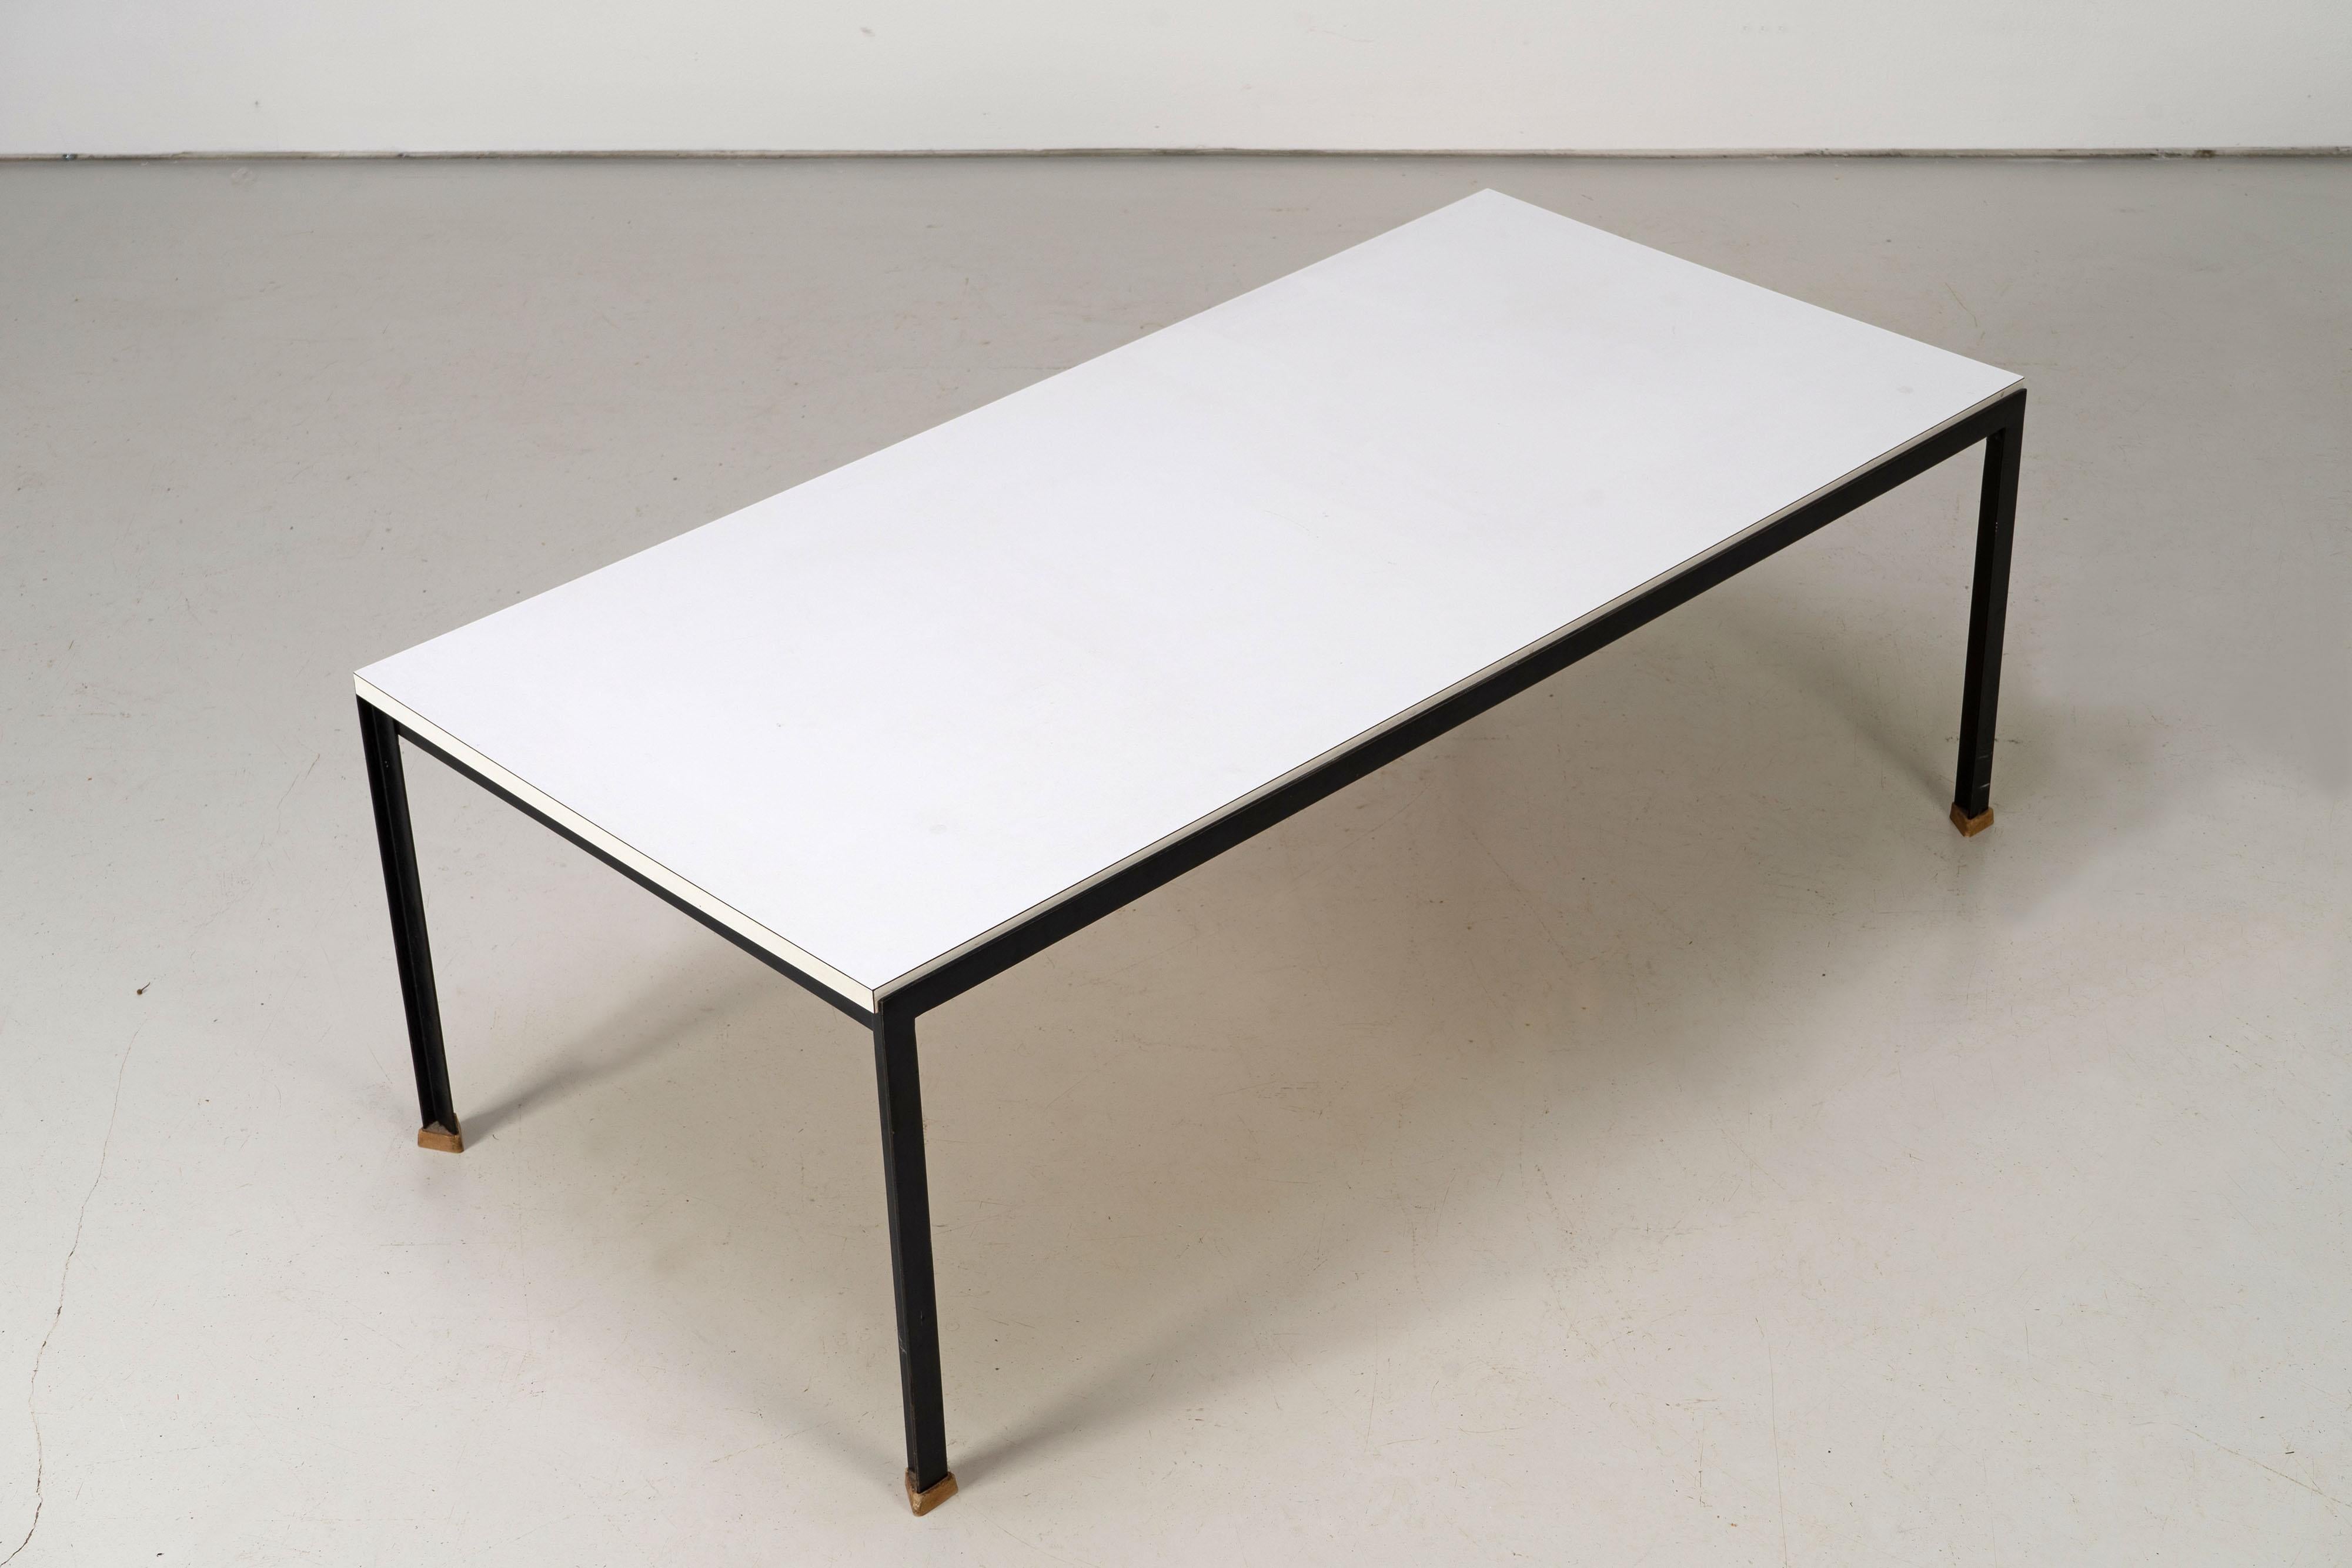 20th Century T Angle Coffee Table by Florence Knoll for Knoll International 1950s For Sale